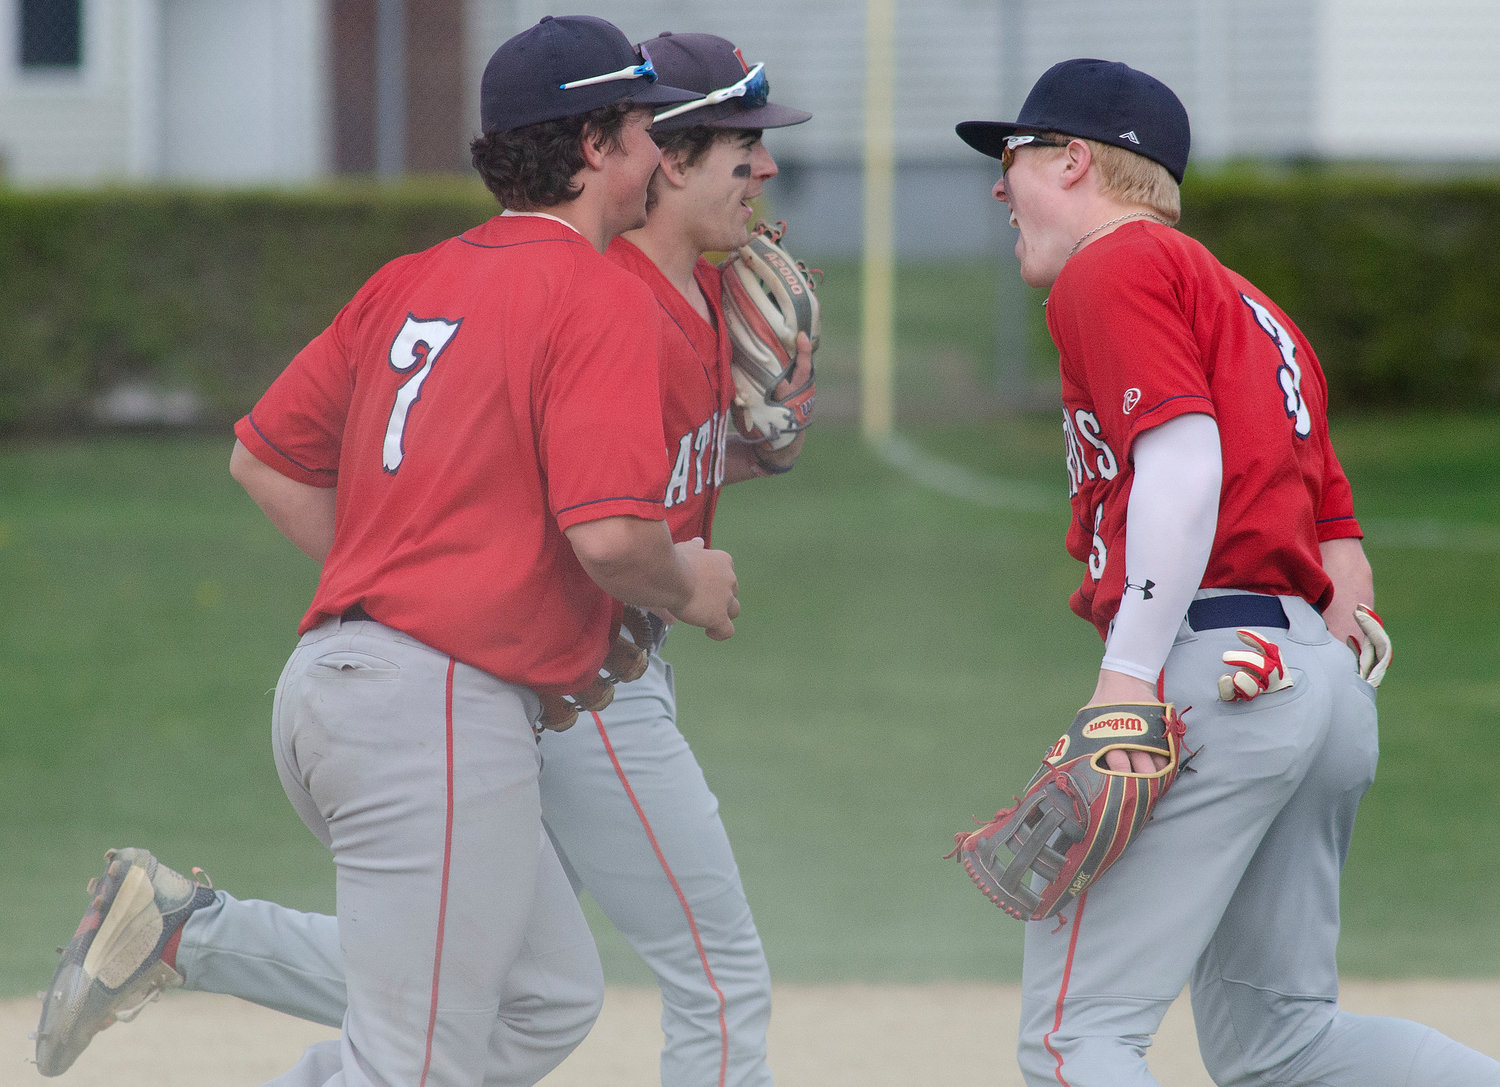 Gavin Bicho (right) celebrates with outfielders Shane Harvey (left) and Nick Spaner (middle) after they made big plays to get the Patriots out of an inning last week.